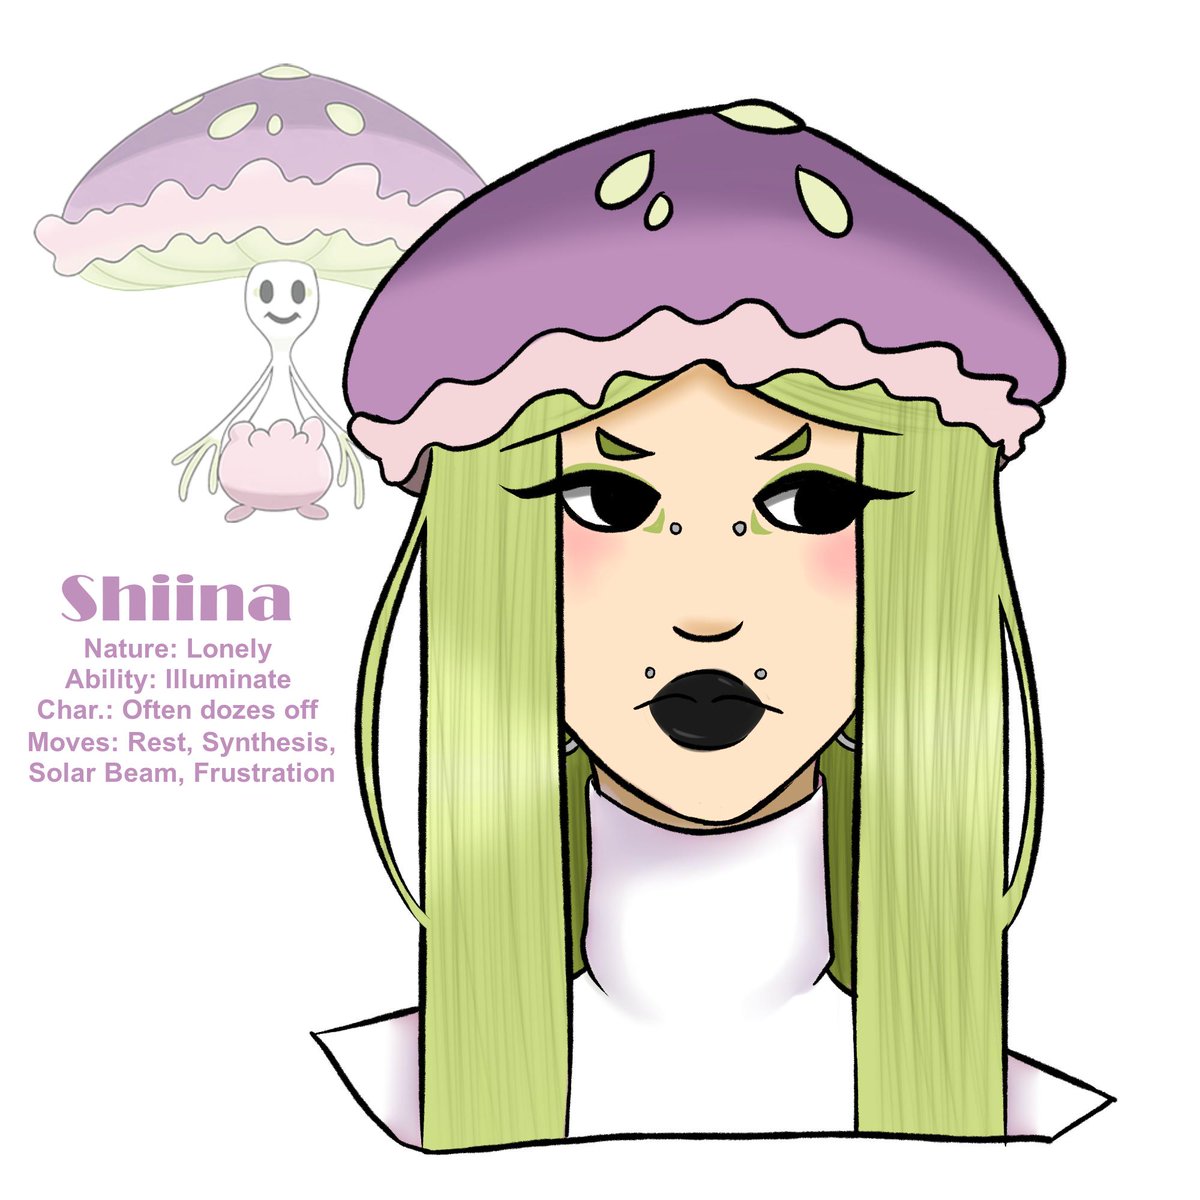 shiina, pokemon gijinka. pan, but prefers women. shes a tattoo artist and pretty quiet and kinda blunt and brutally honest, but really shes sweet and cares a lot about people. protective of her sibling, mar.